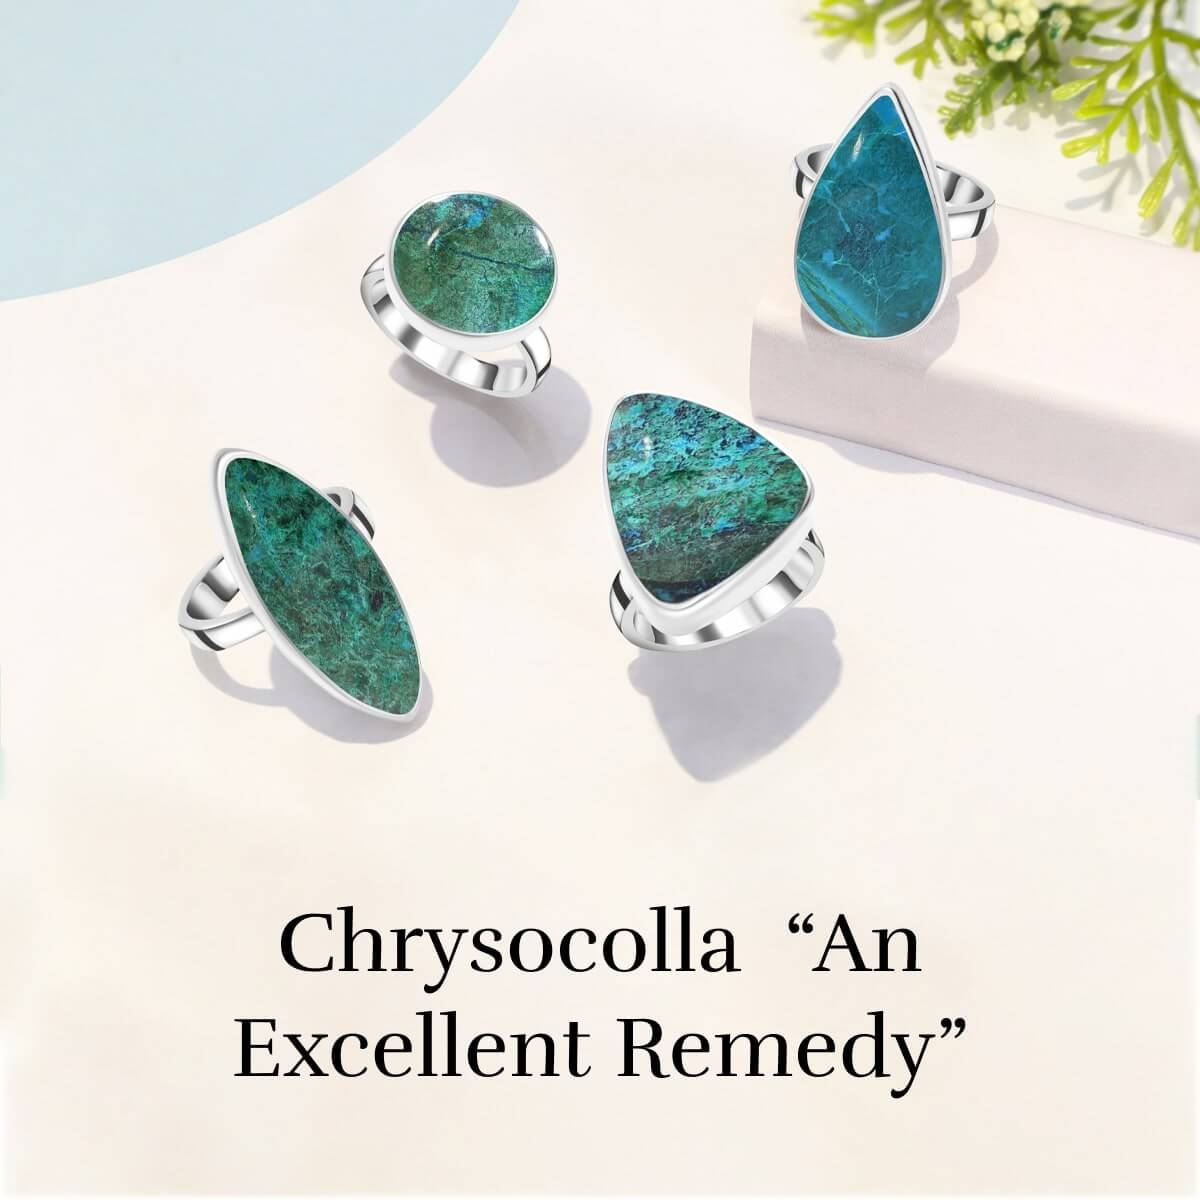 Physical health benefits of Chrysocolla